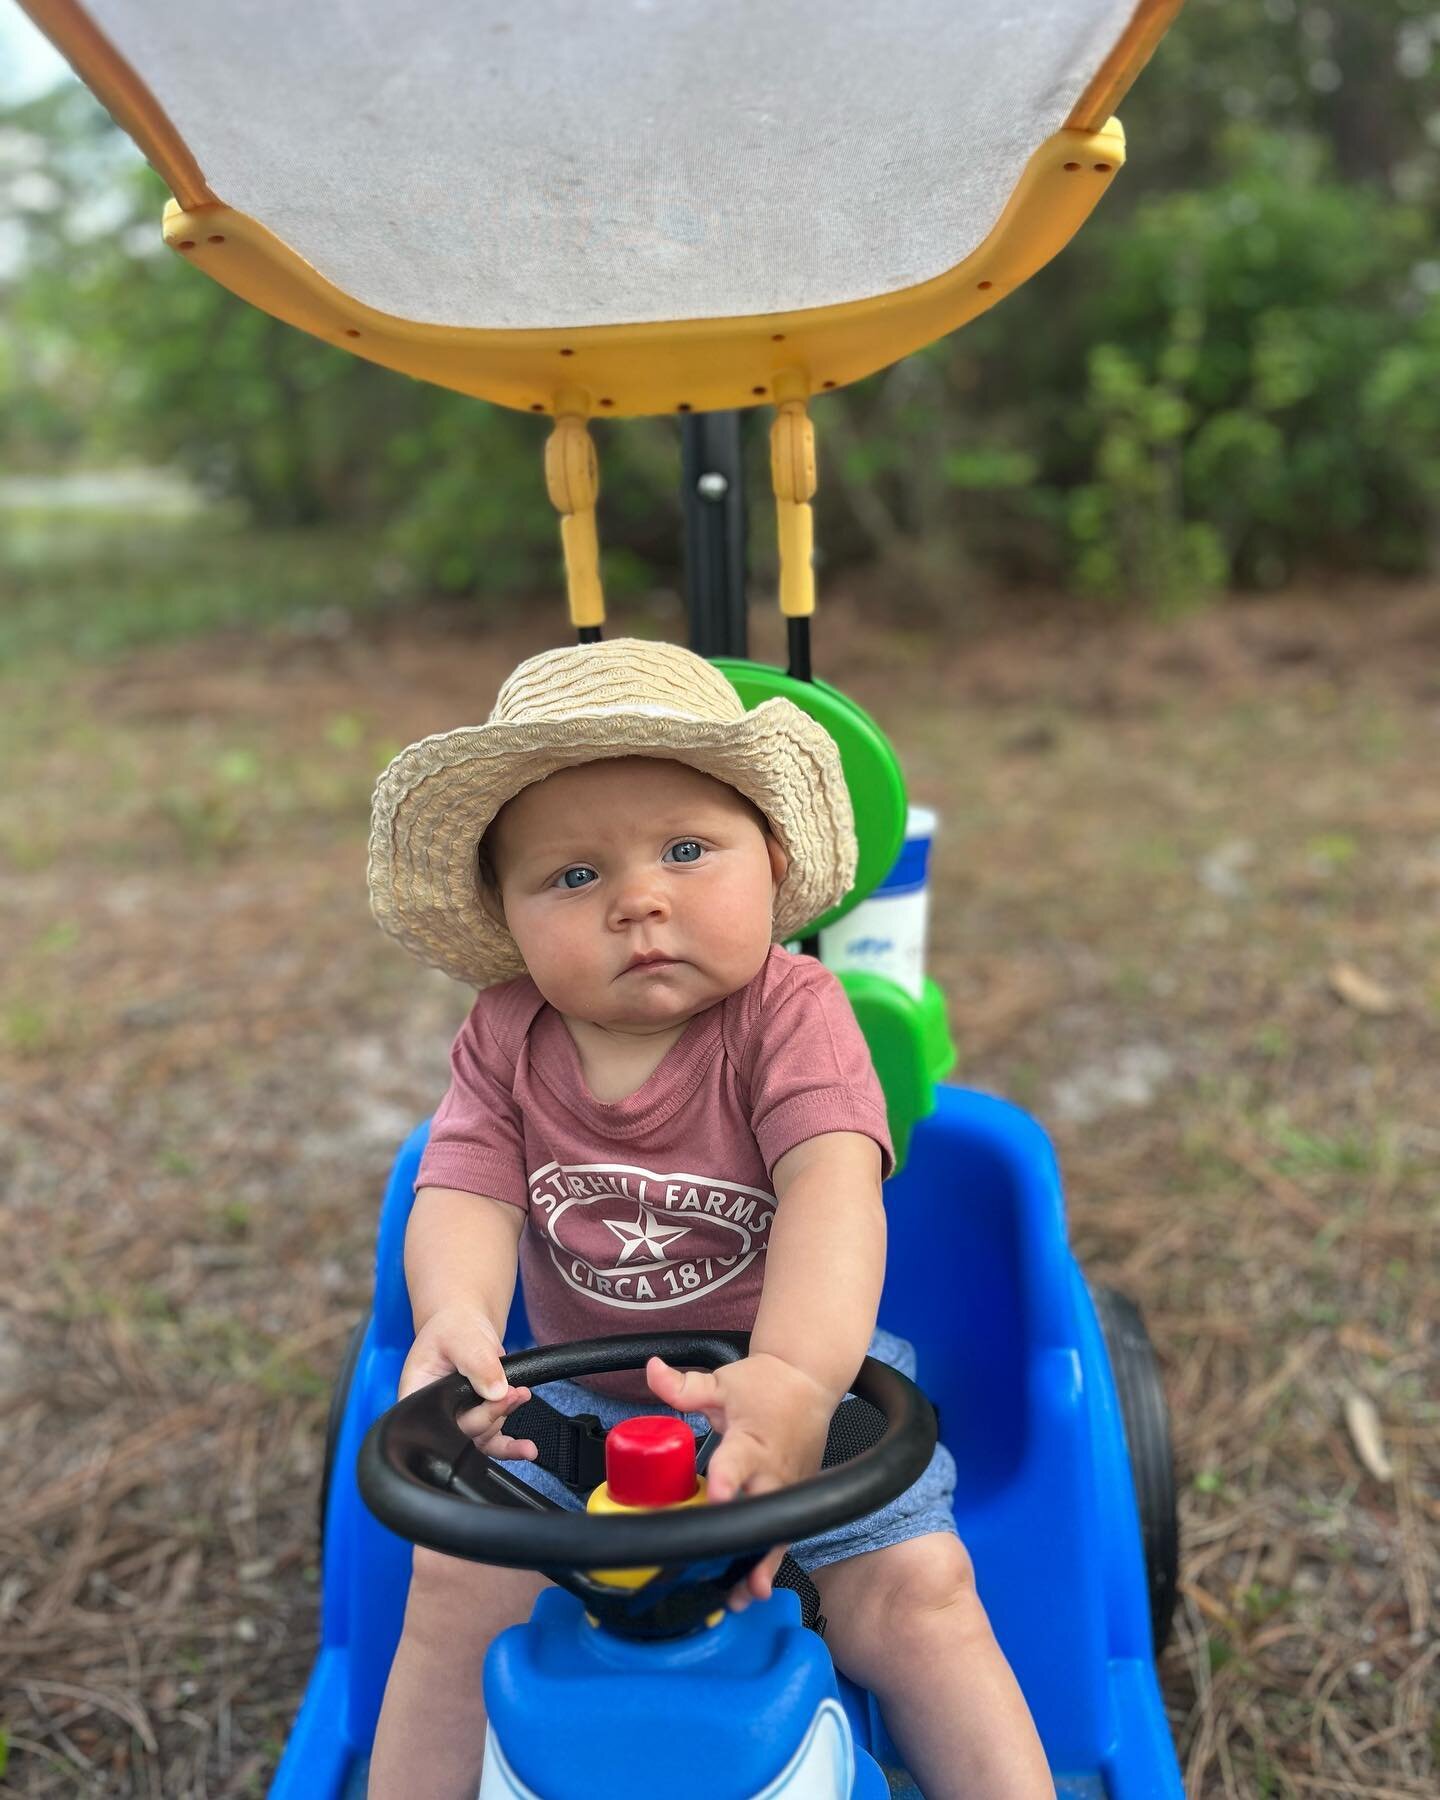 A big shout out to our StarHill Farms baby rancher- Isla Luna Frappier on her tractor!